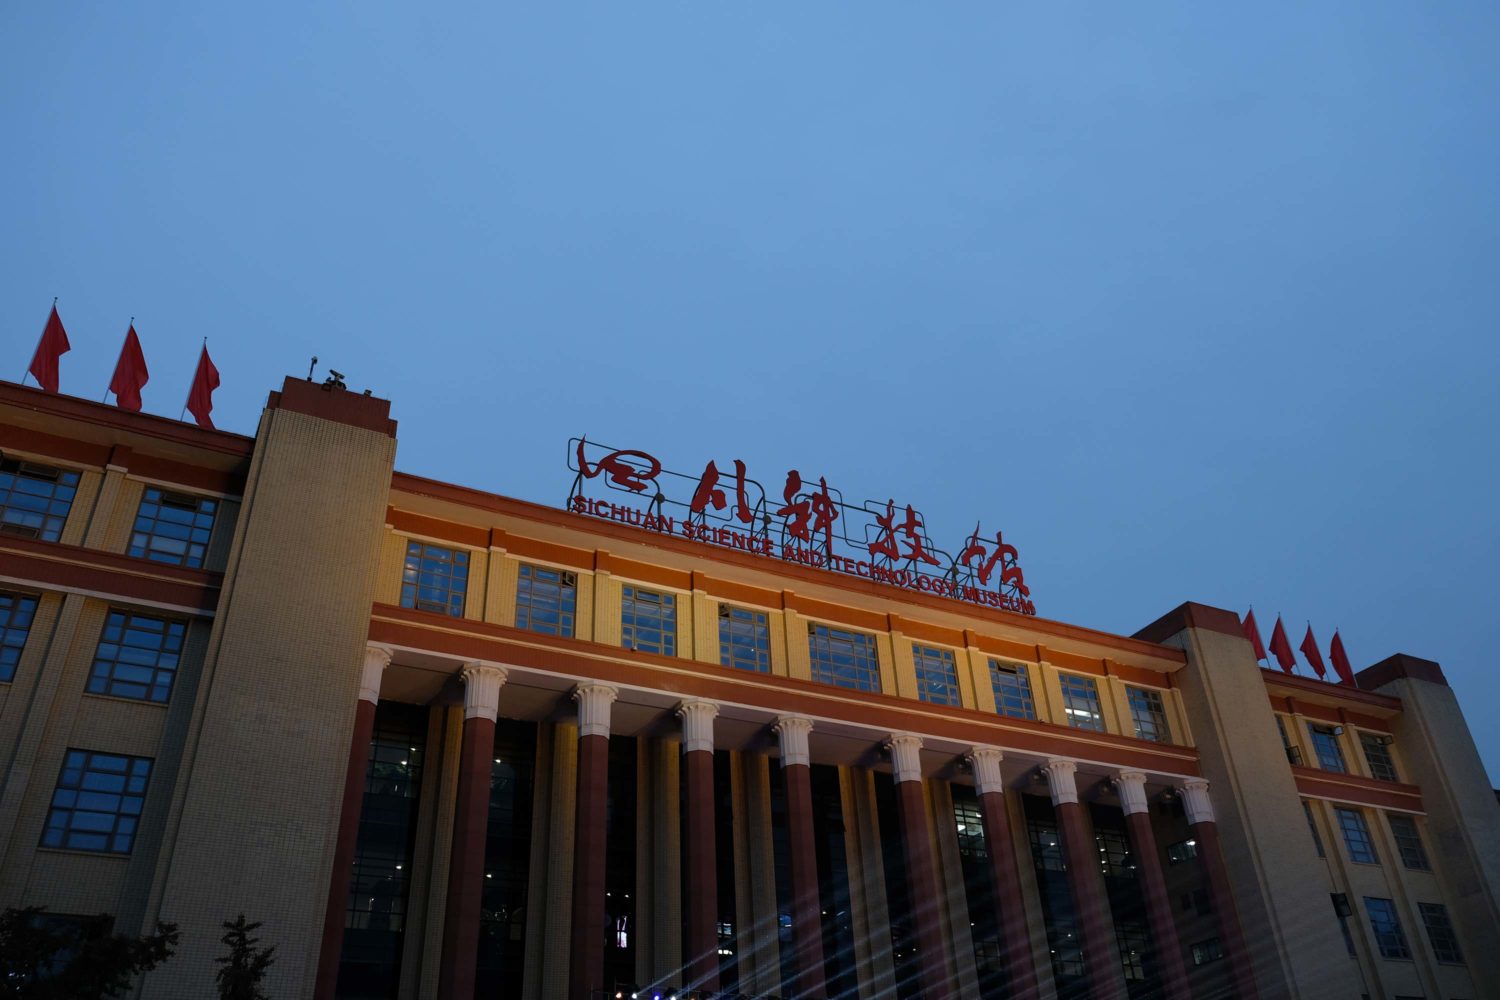 Sichuan science and technology museum